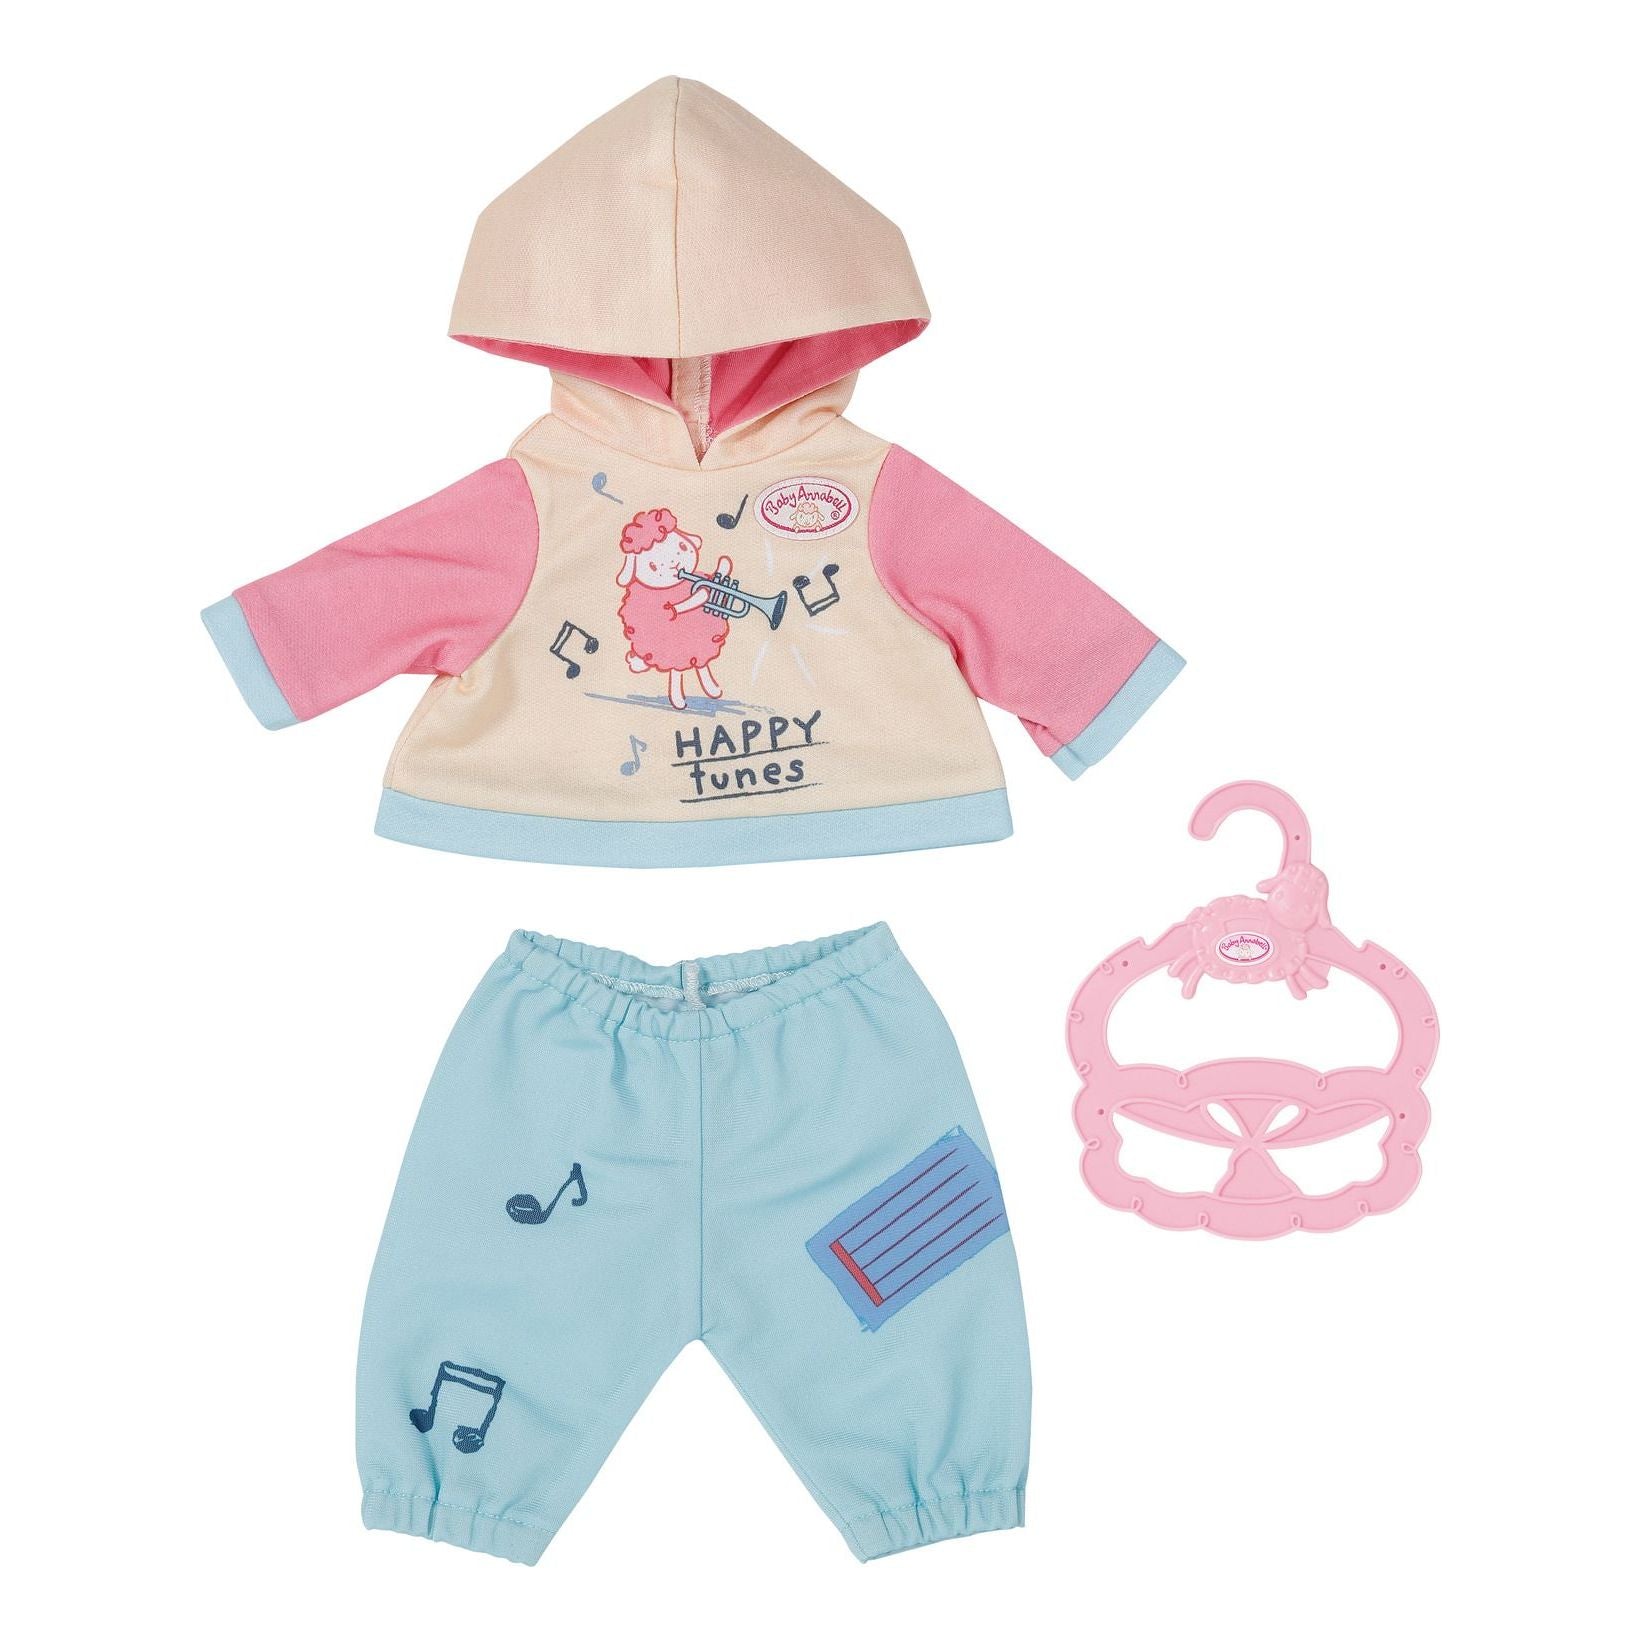 Baby Annabell Little Jogging Suit 36cm Baby Annabell